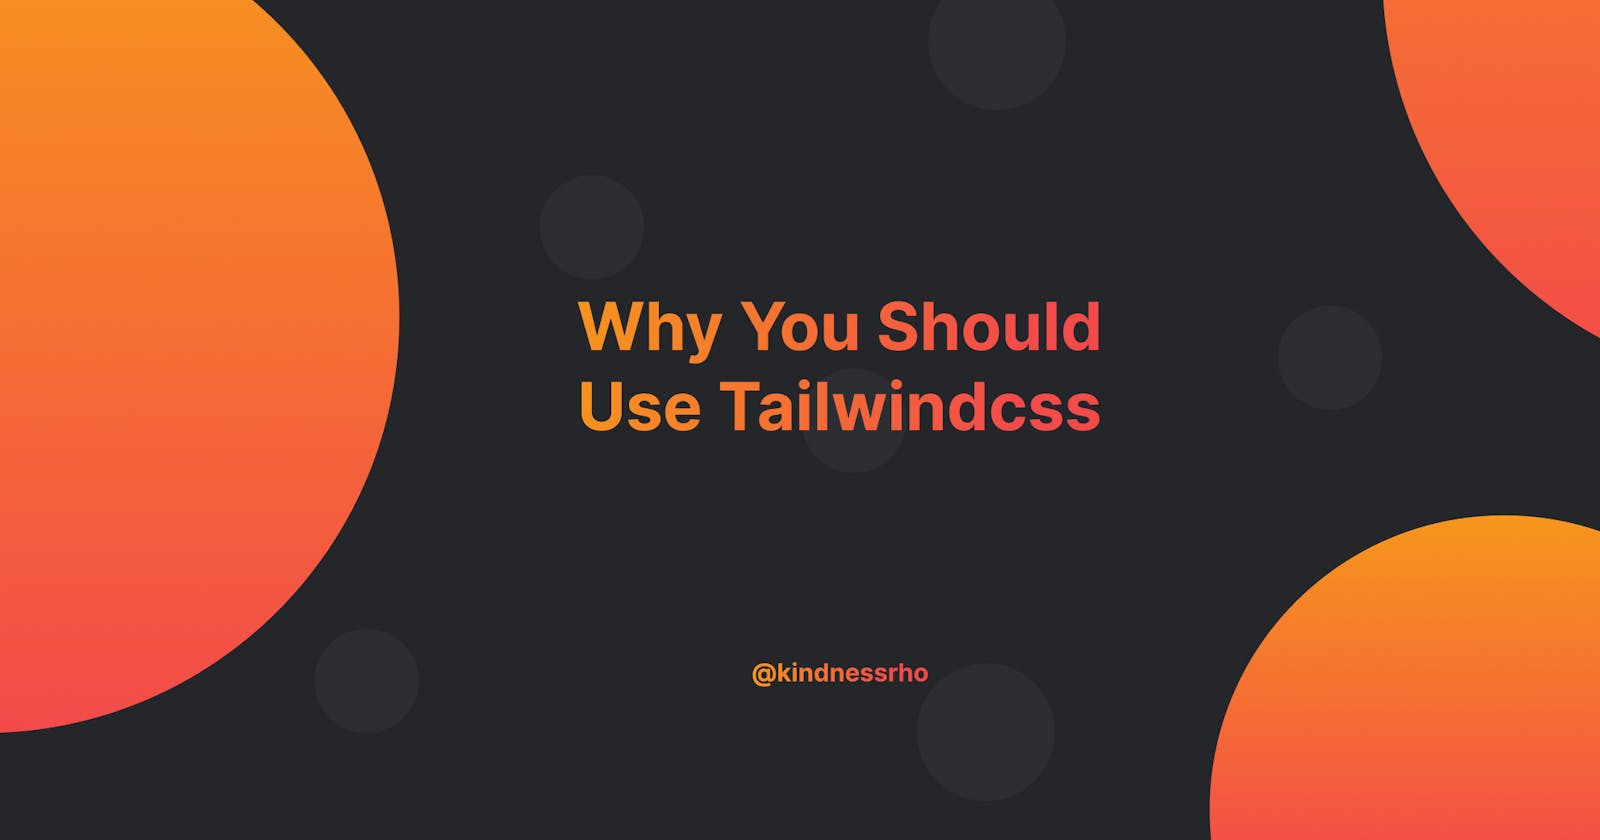 Why You Should Use Tailwindcss